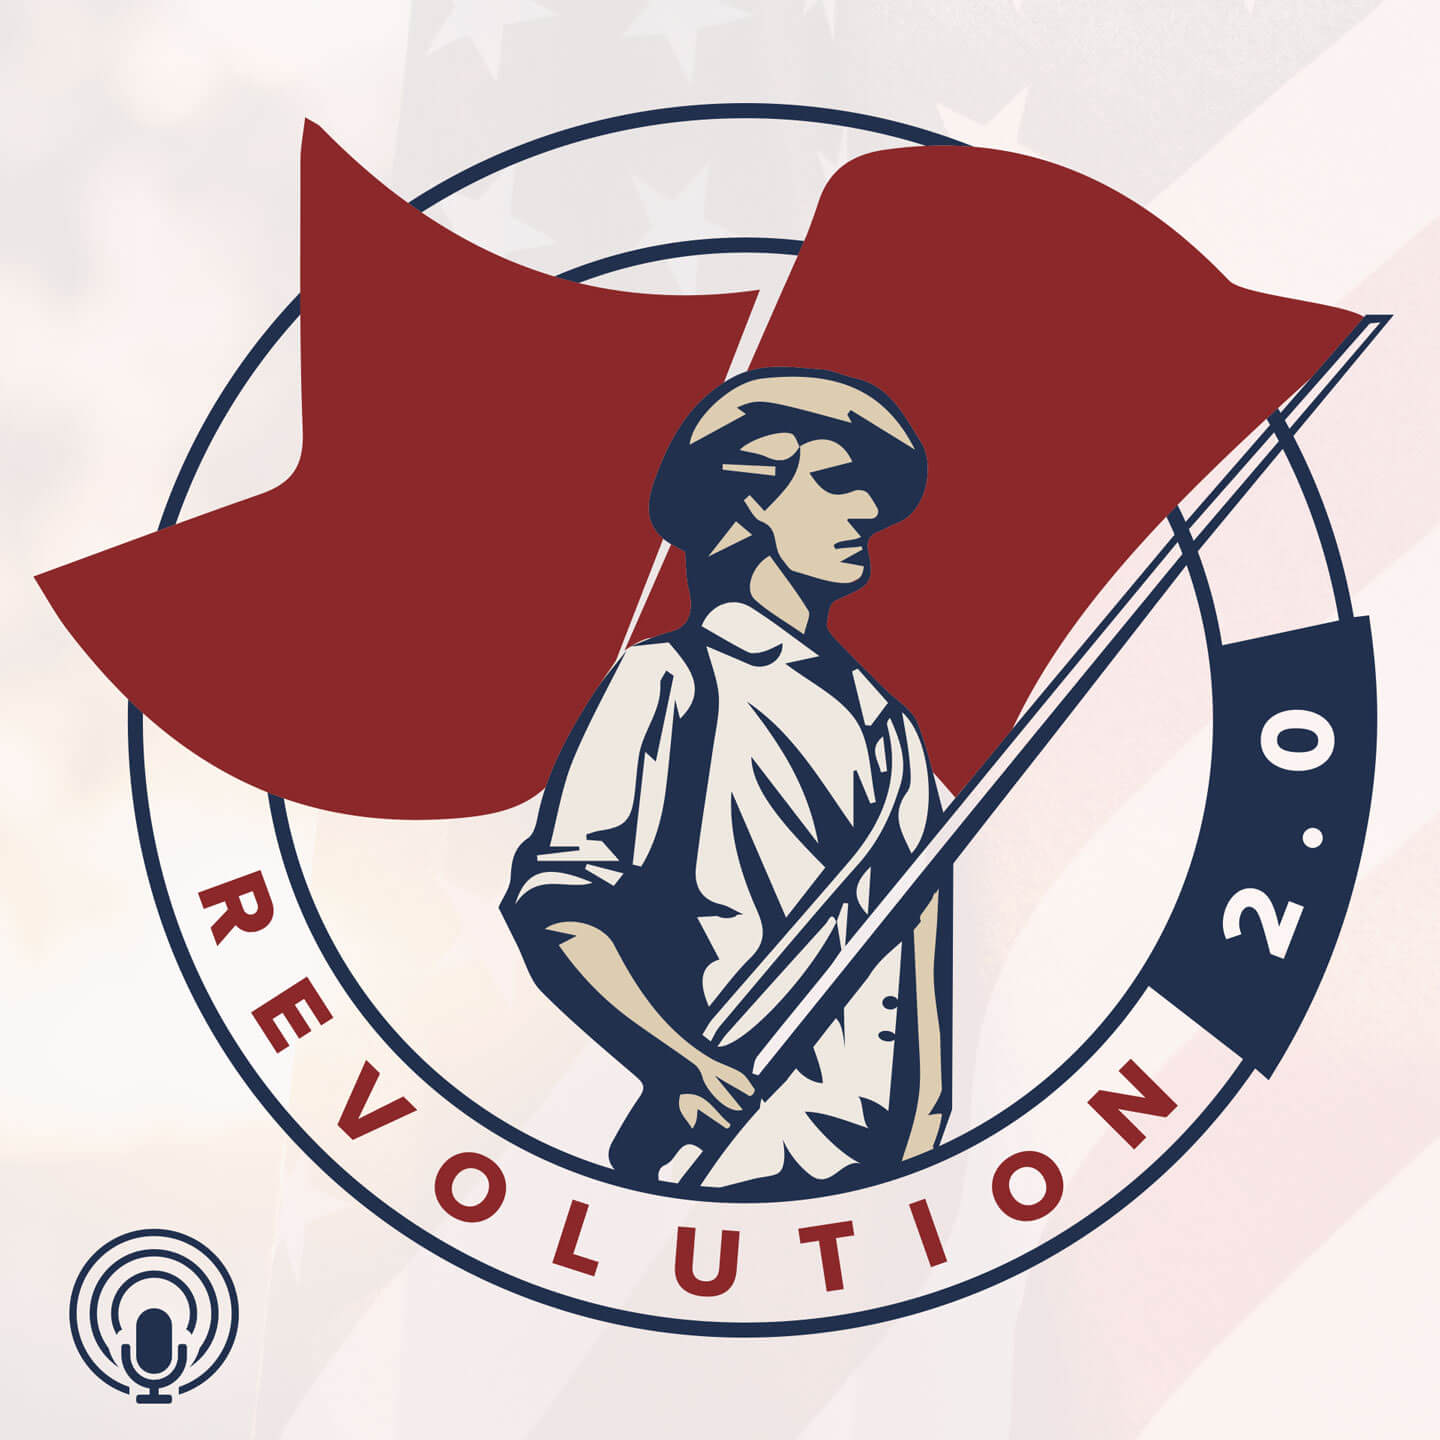 Revolution 2.0™? You Must Be Conservative! (EP.315) Image